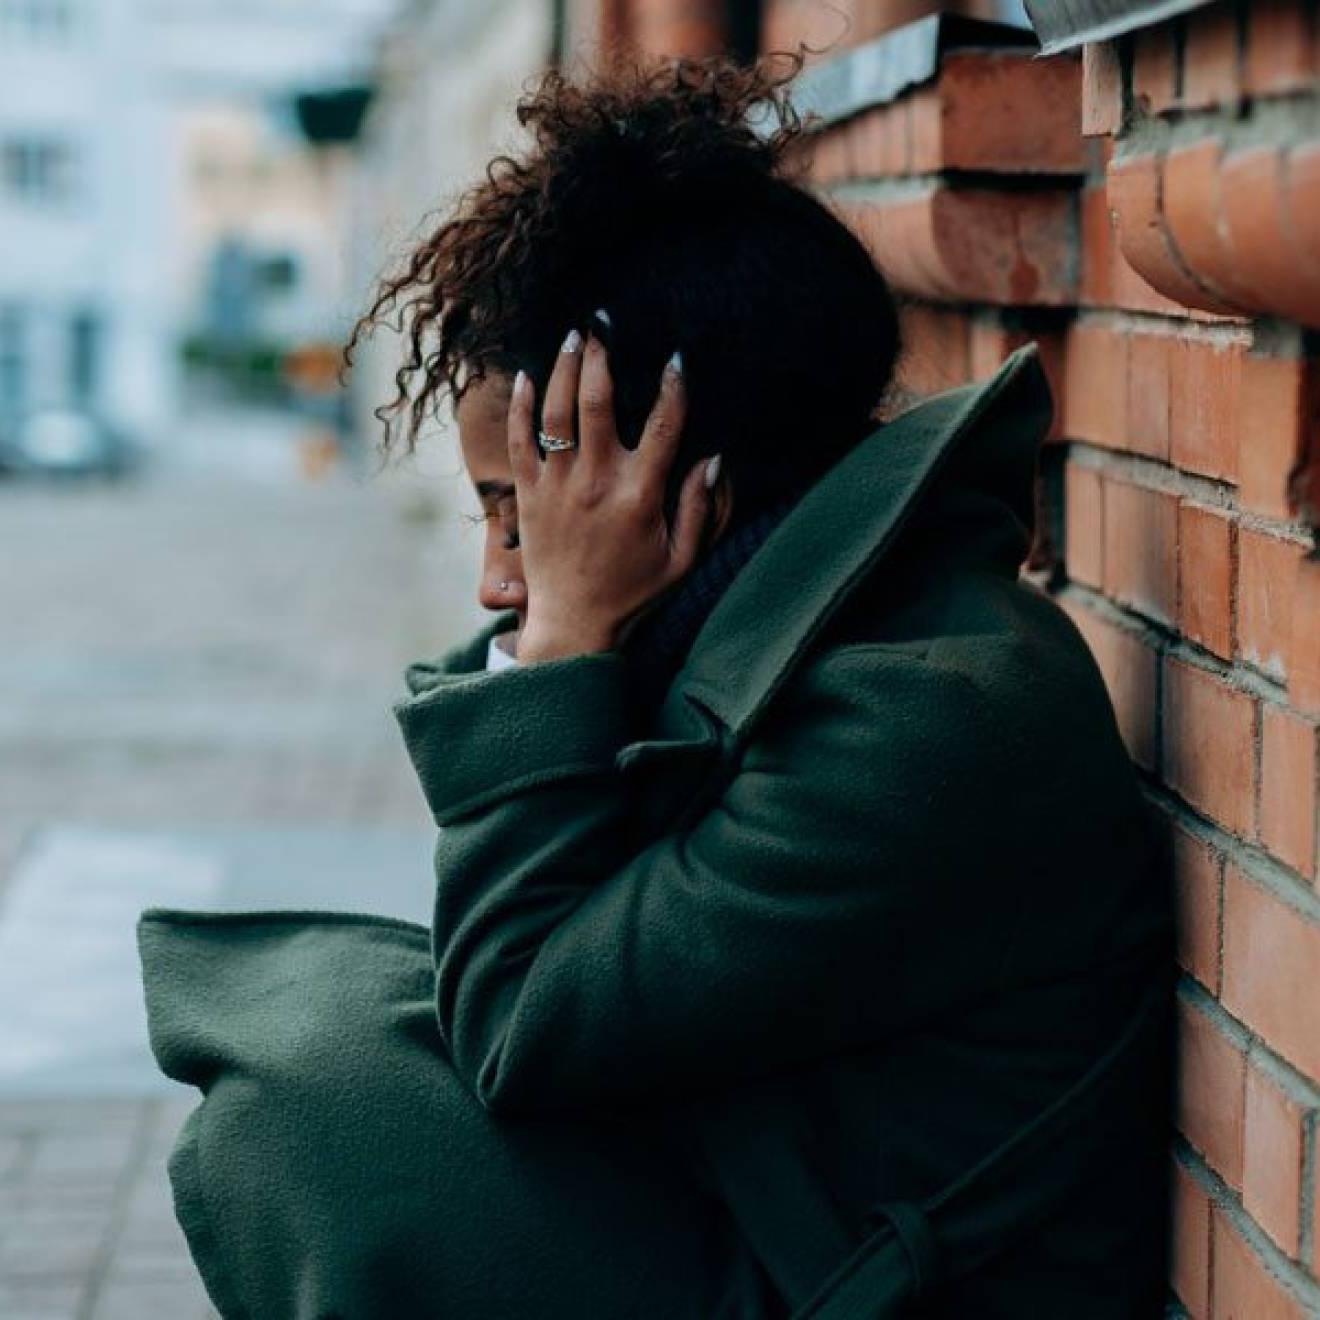 A young Black woman crouches against a brick wall holding her head